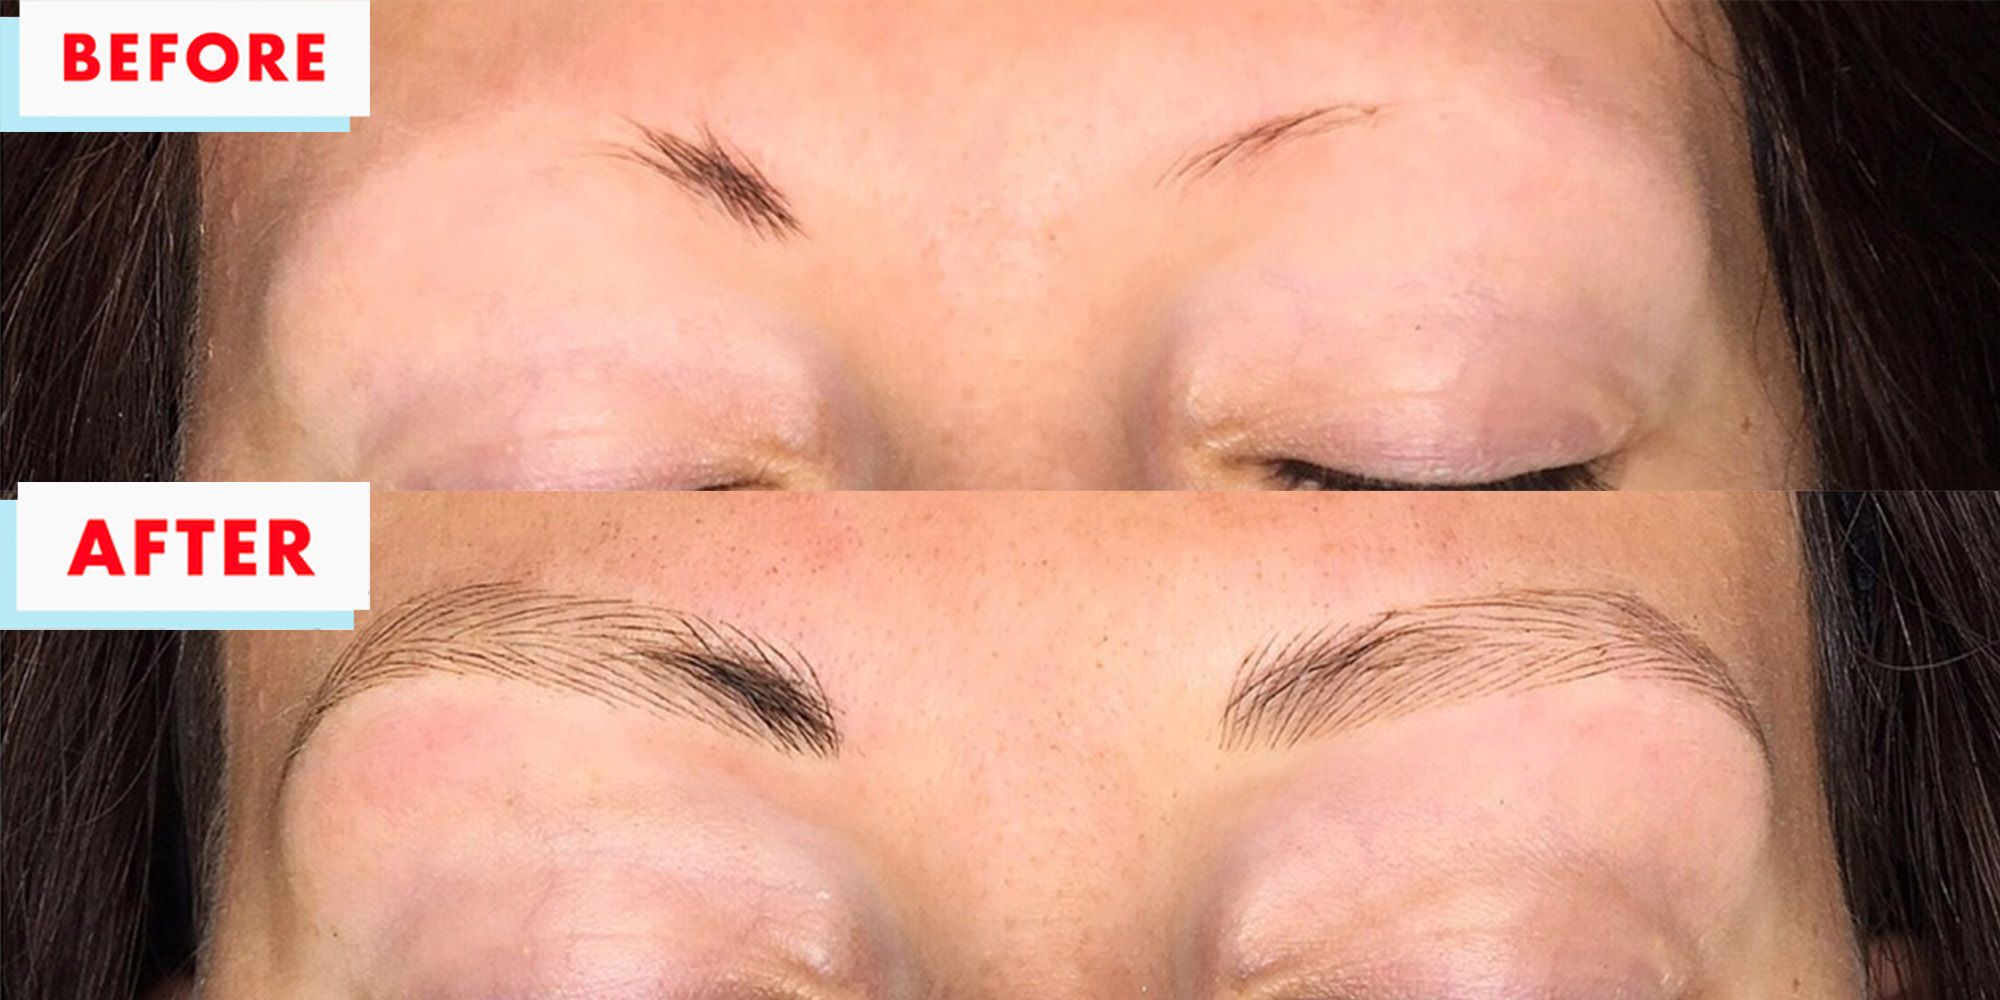 Get Better Ombre Powder Brows Healing Results By Following Simple Steps